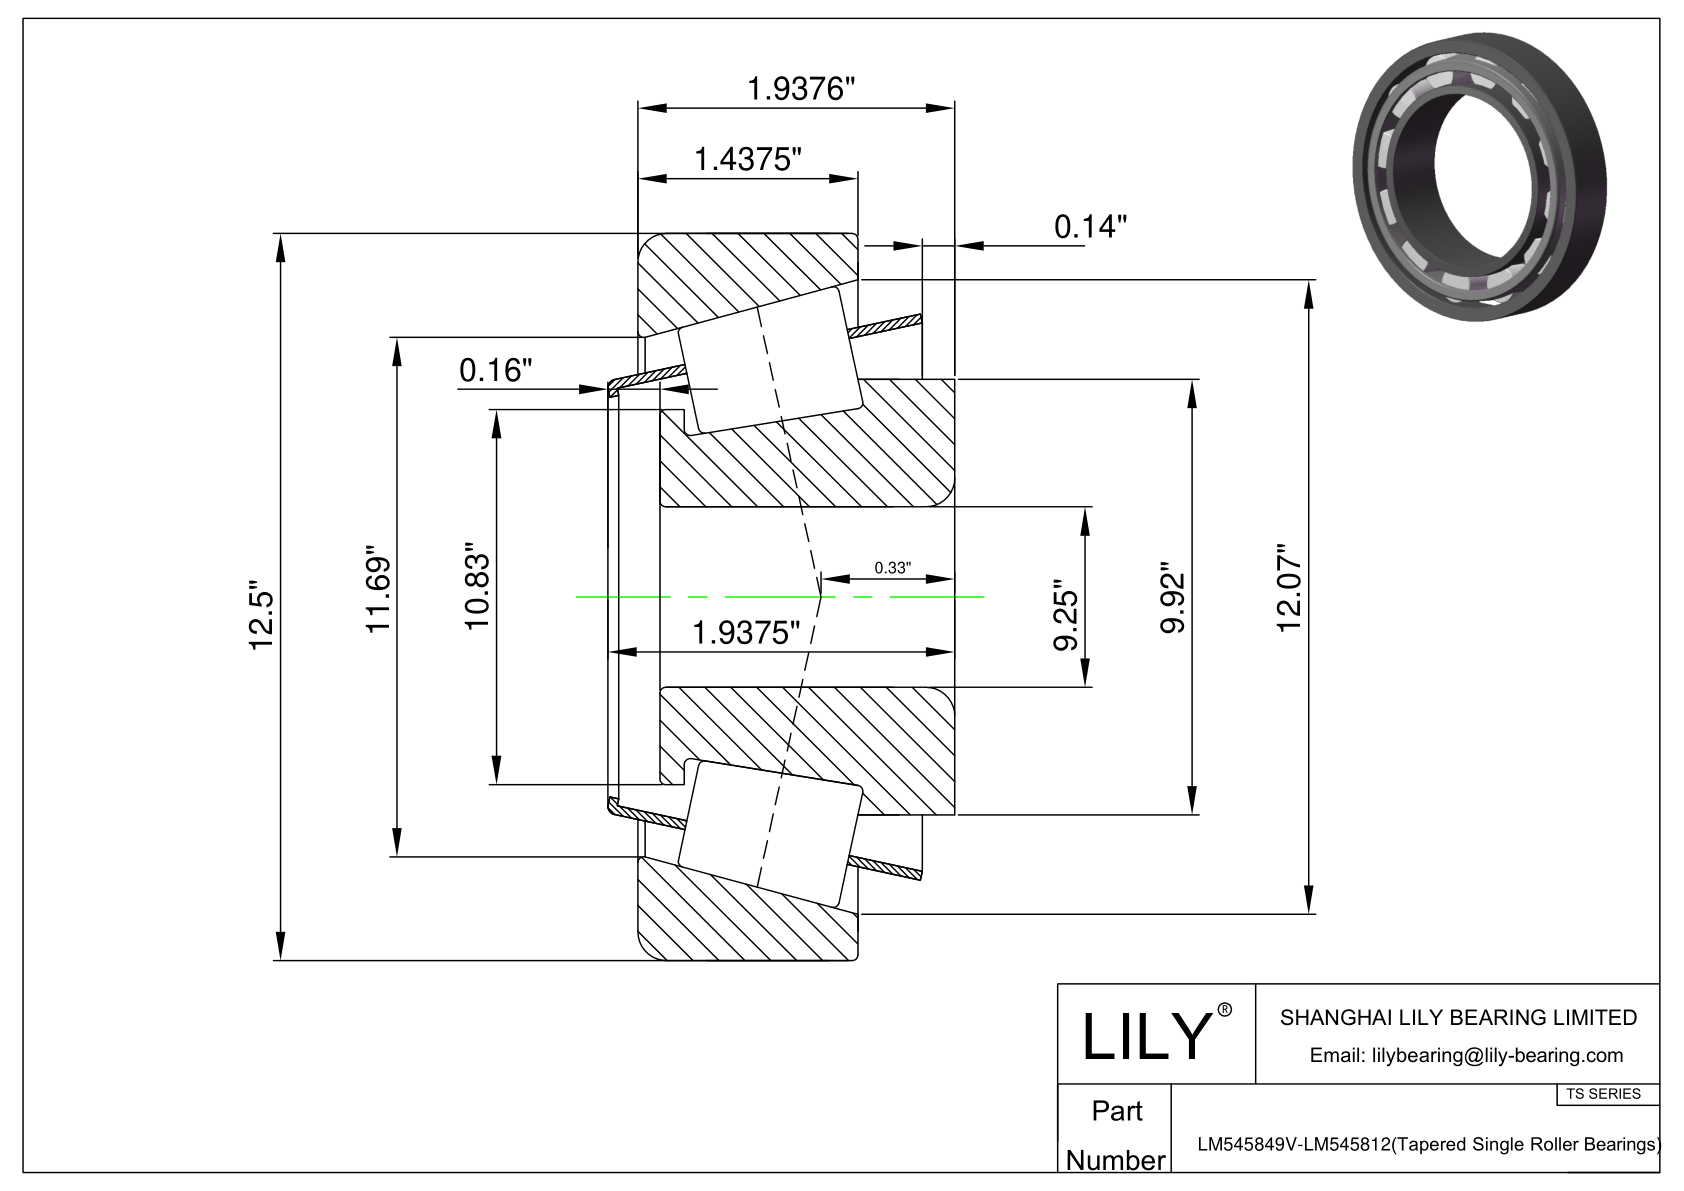 LM545849V-LM545812 TS (Tapered Single Roller Bearings) (Imperial) cad drawing